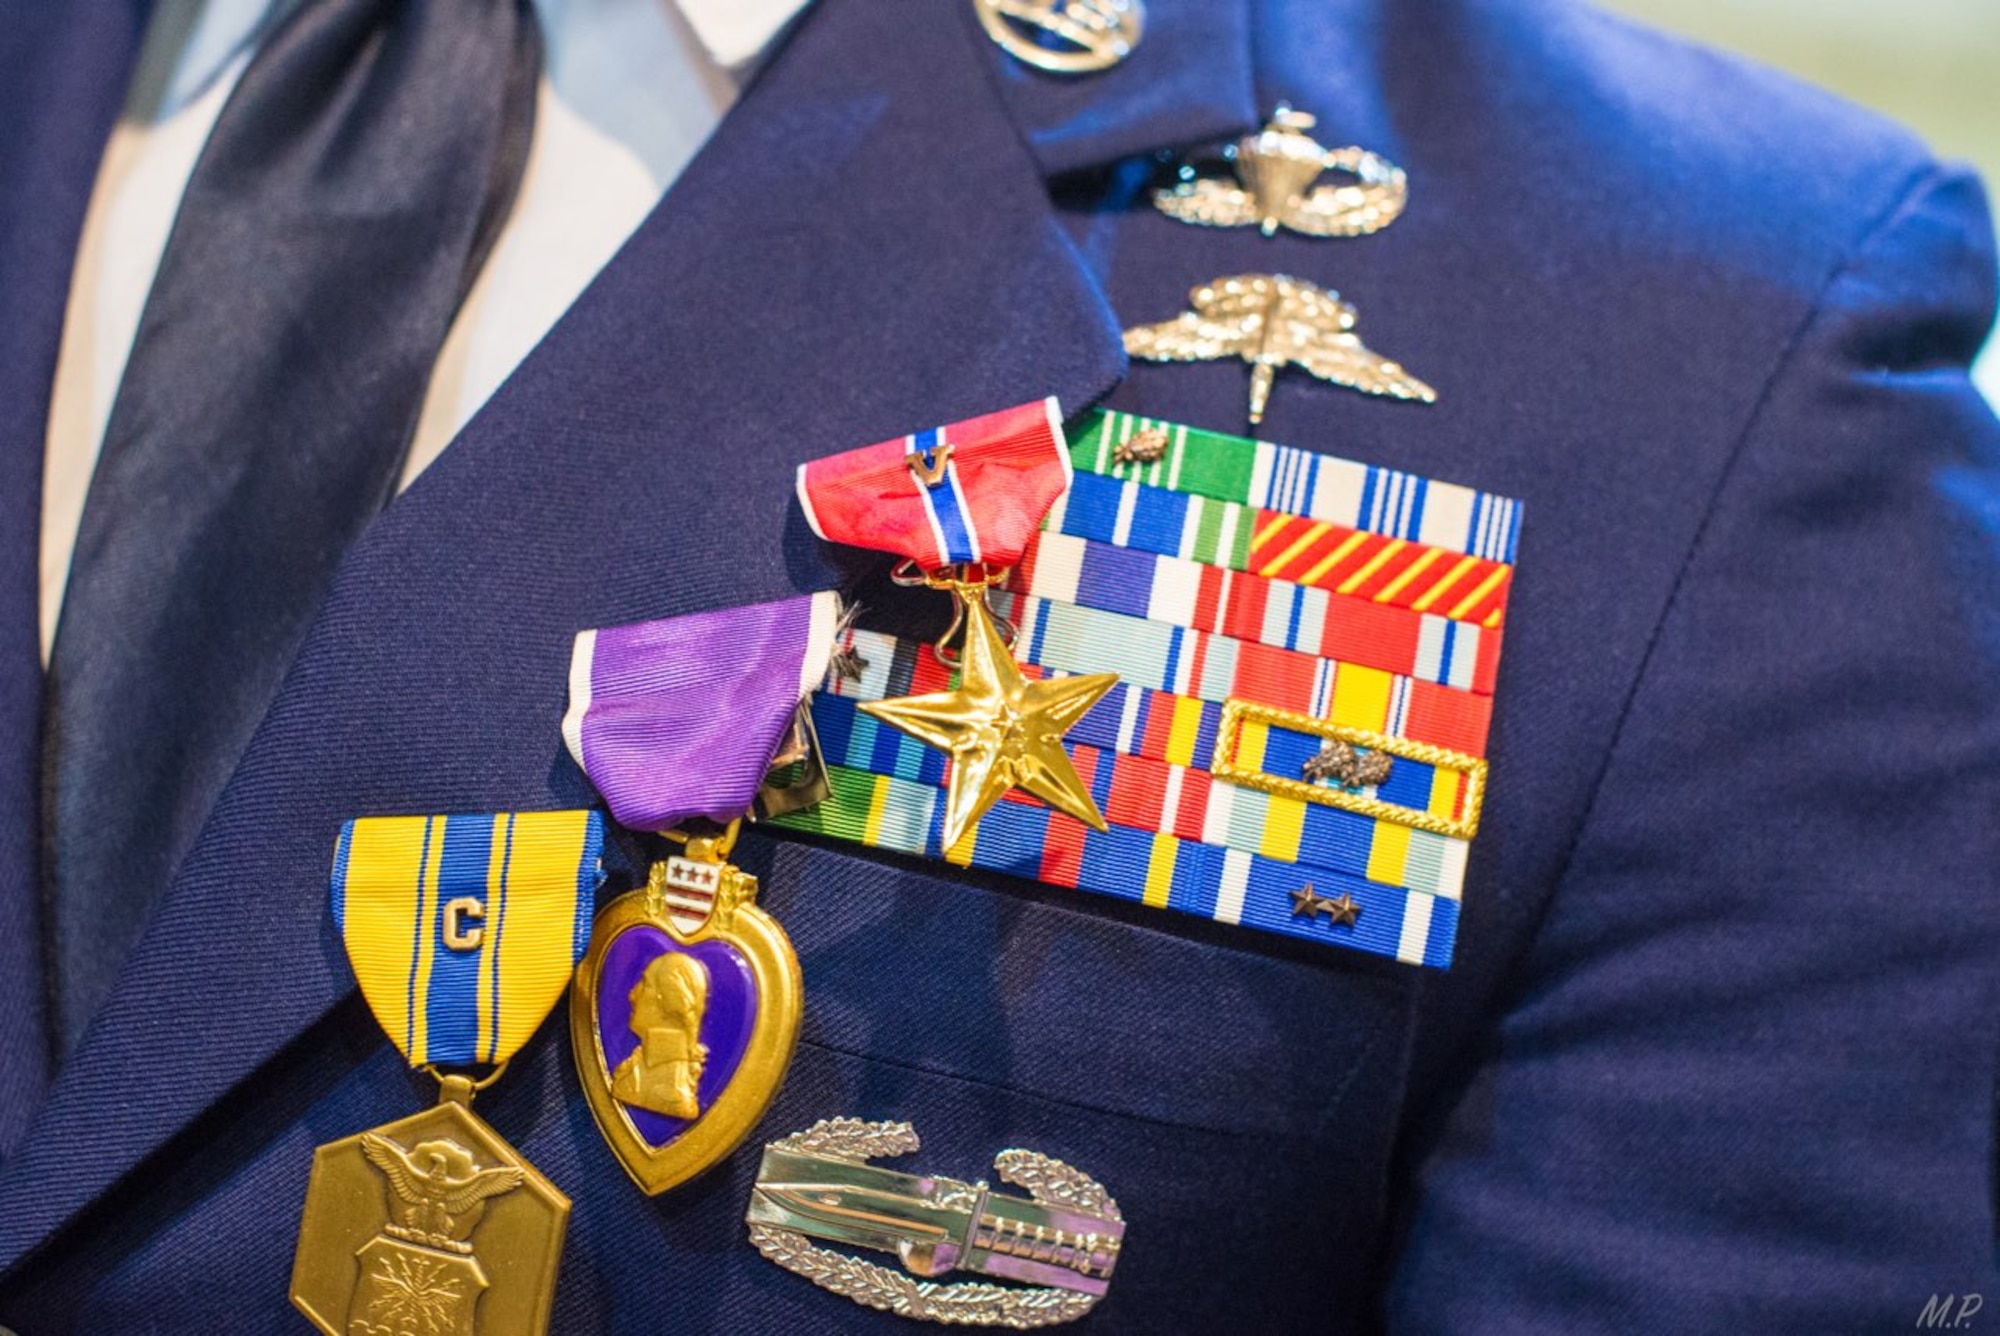 Decorations hang on the blue uniform lapel of an Airman